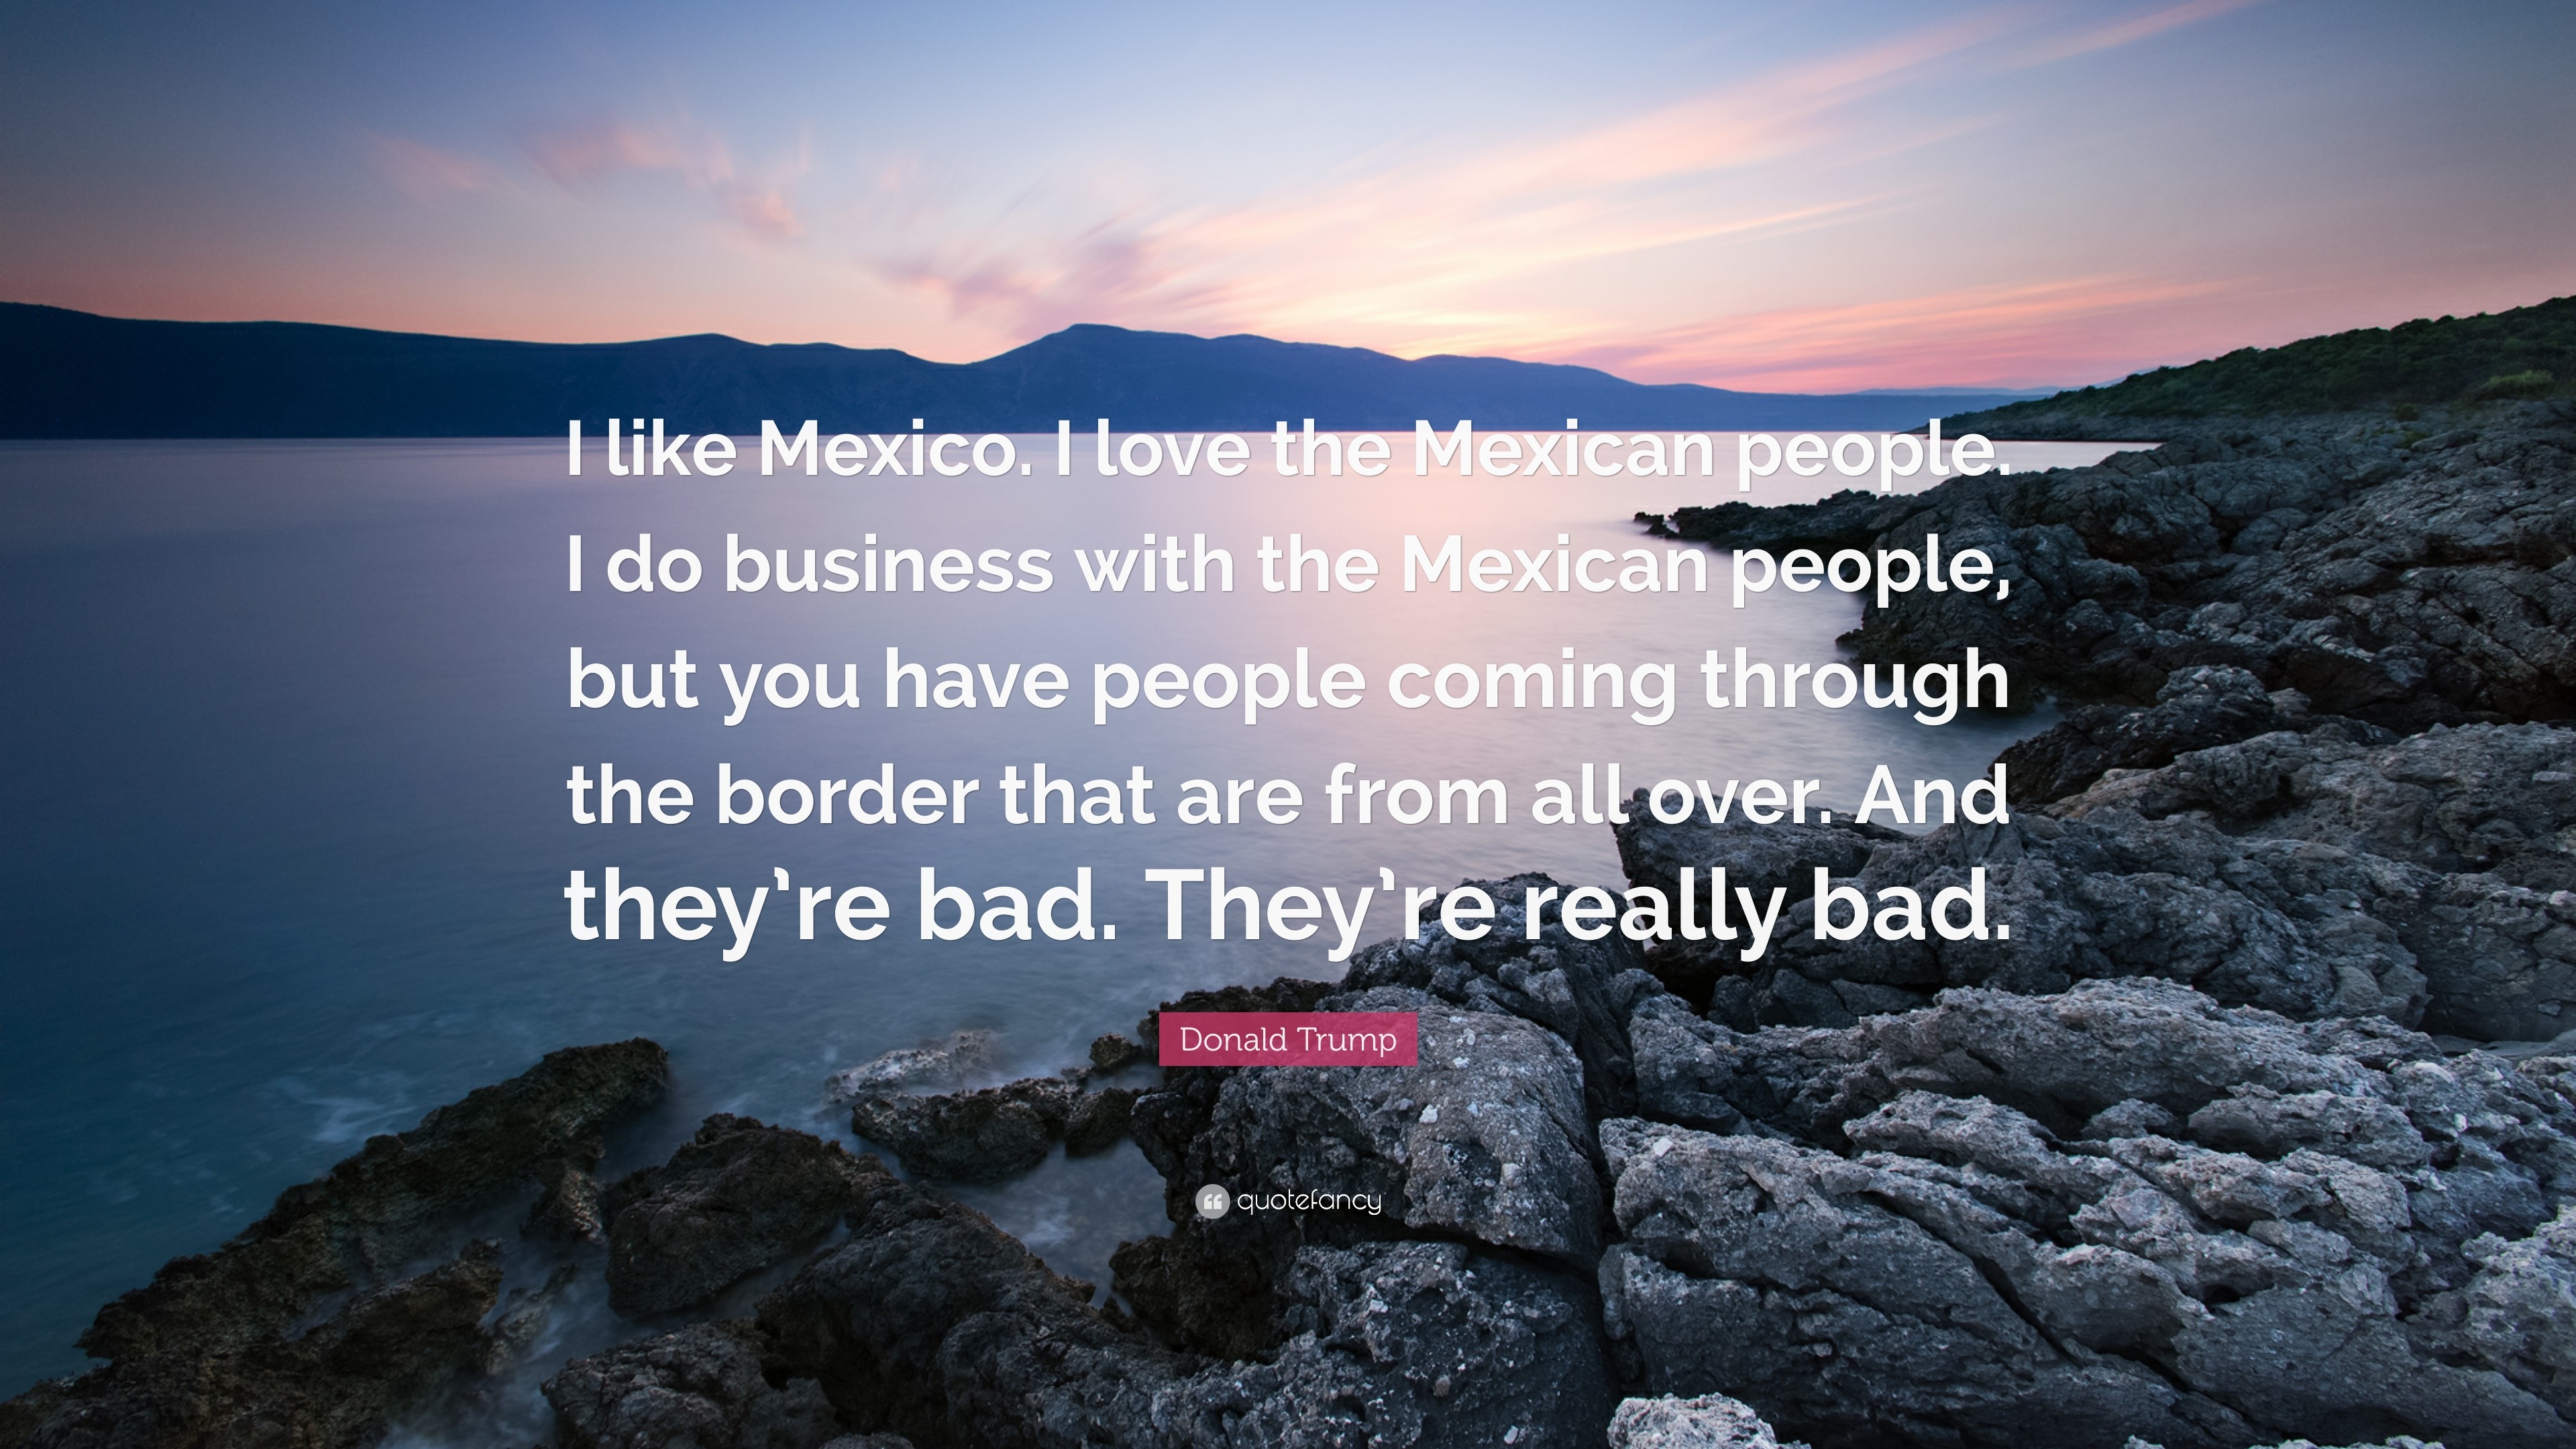 Quotes from Mexico